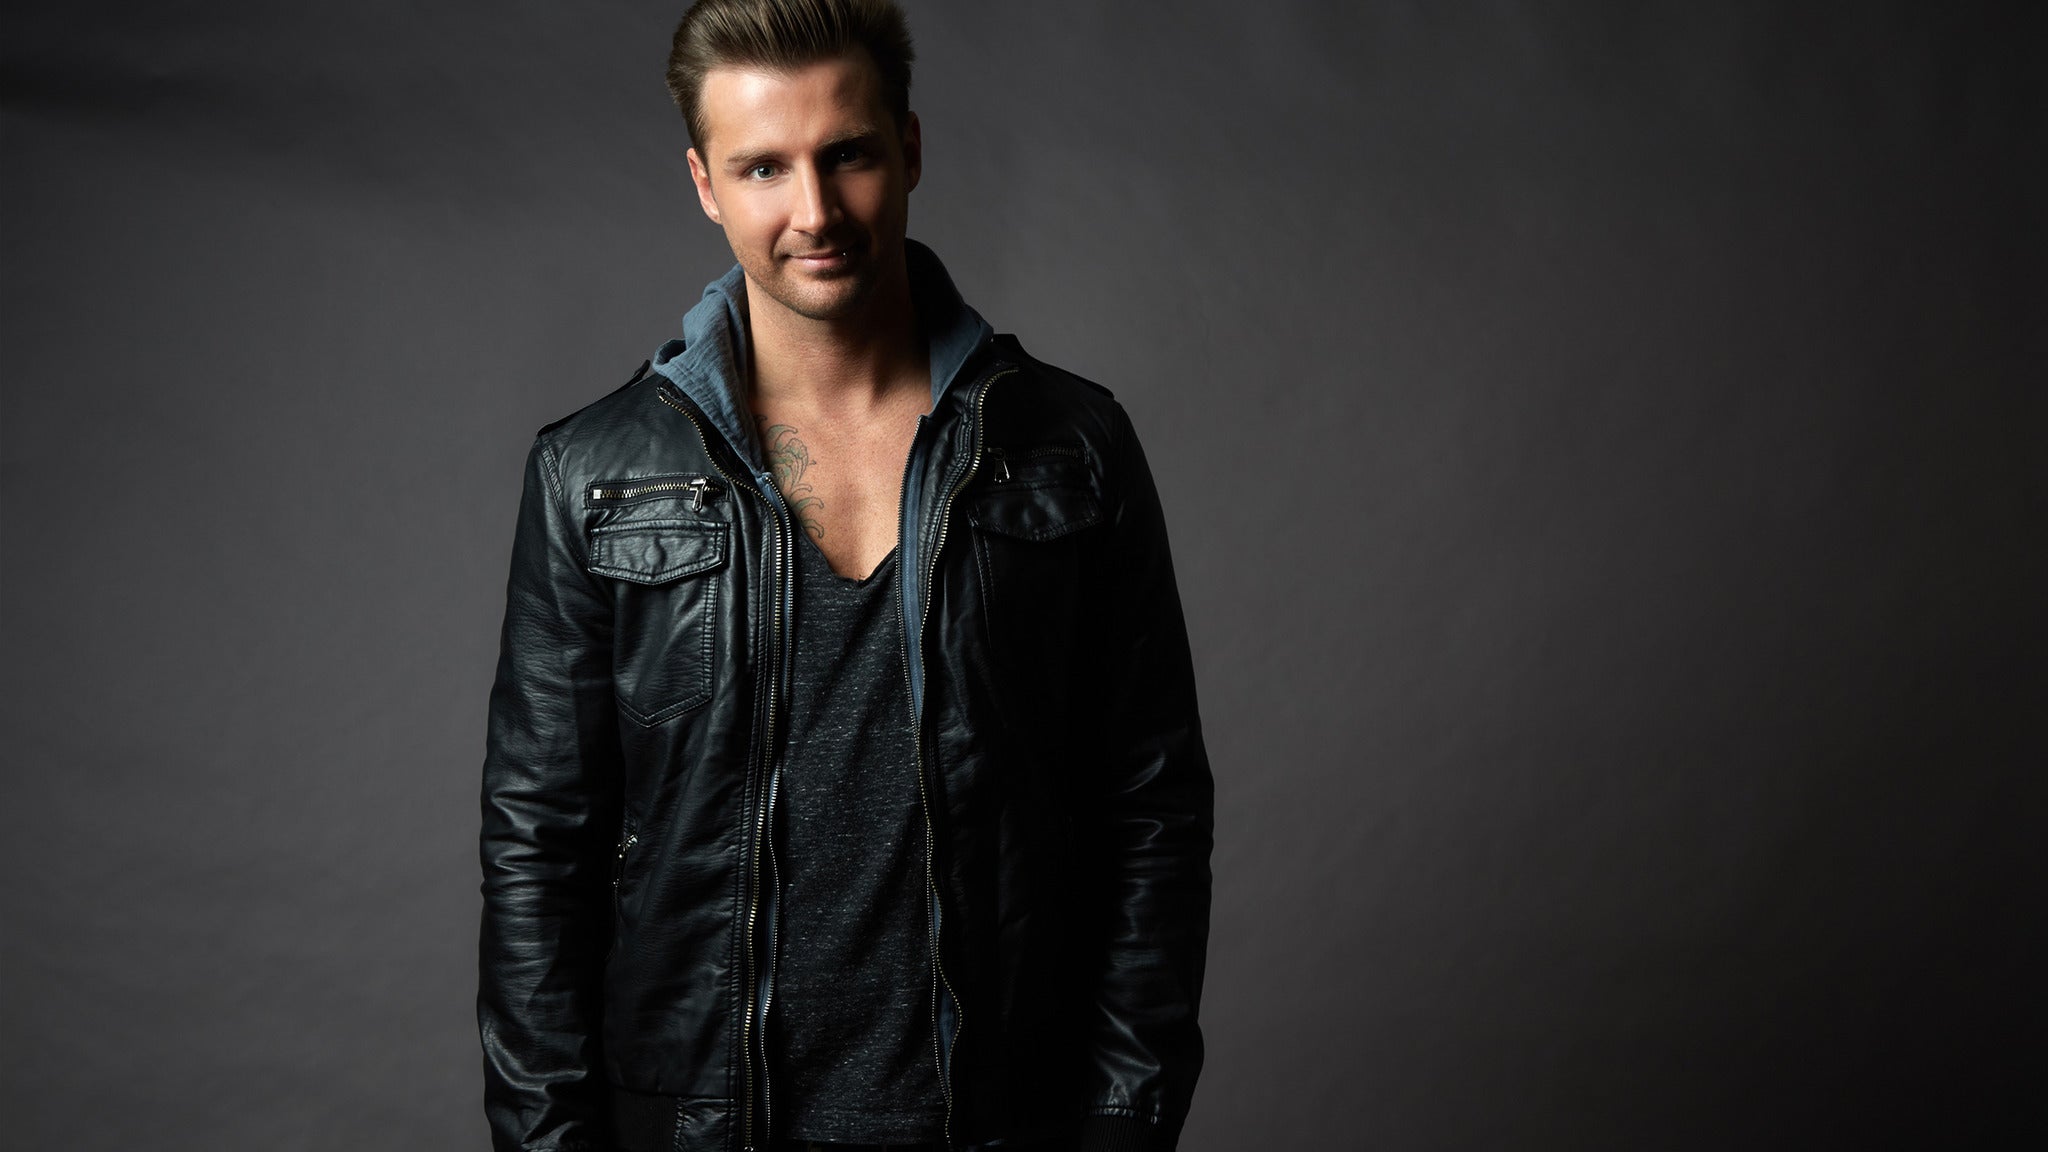 SECONDHAND SERENADE THE JUST BECAUSE YOU SING LOUD TOUR tickets